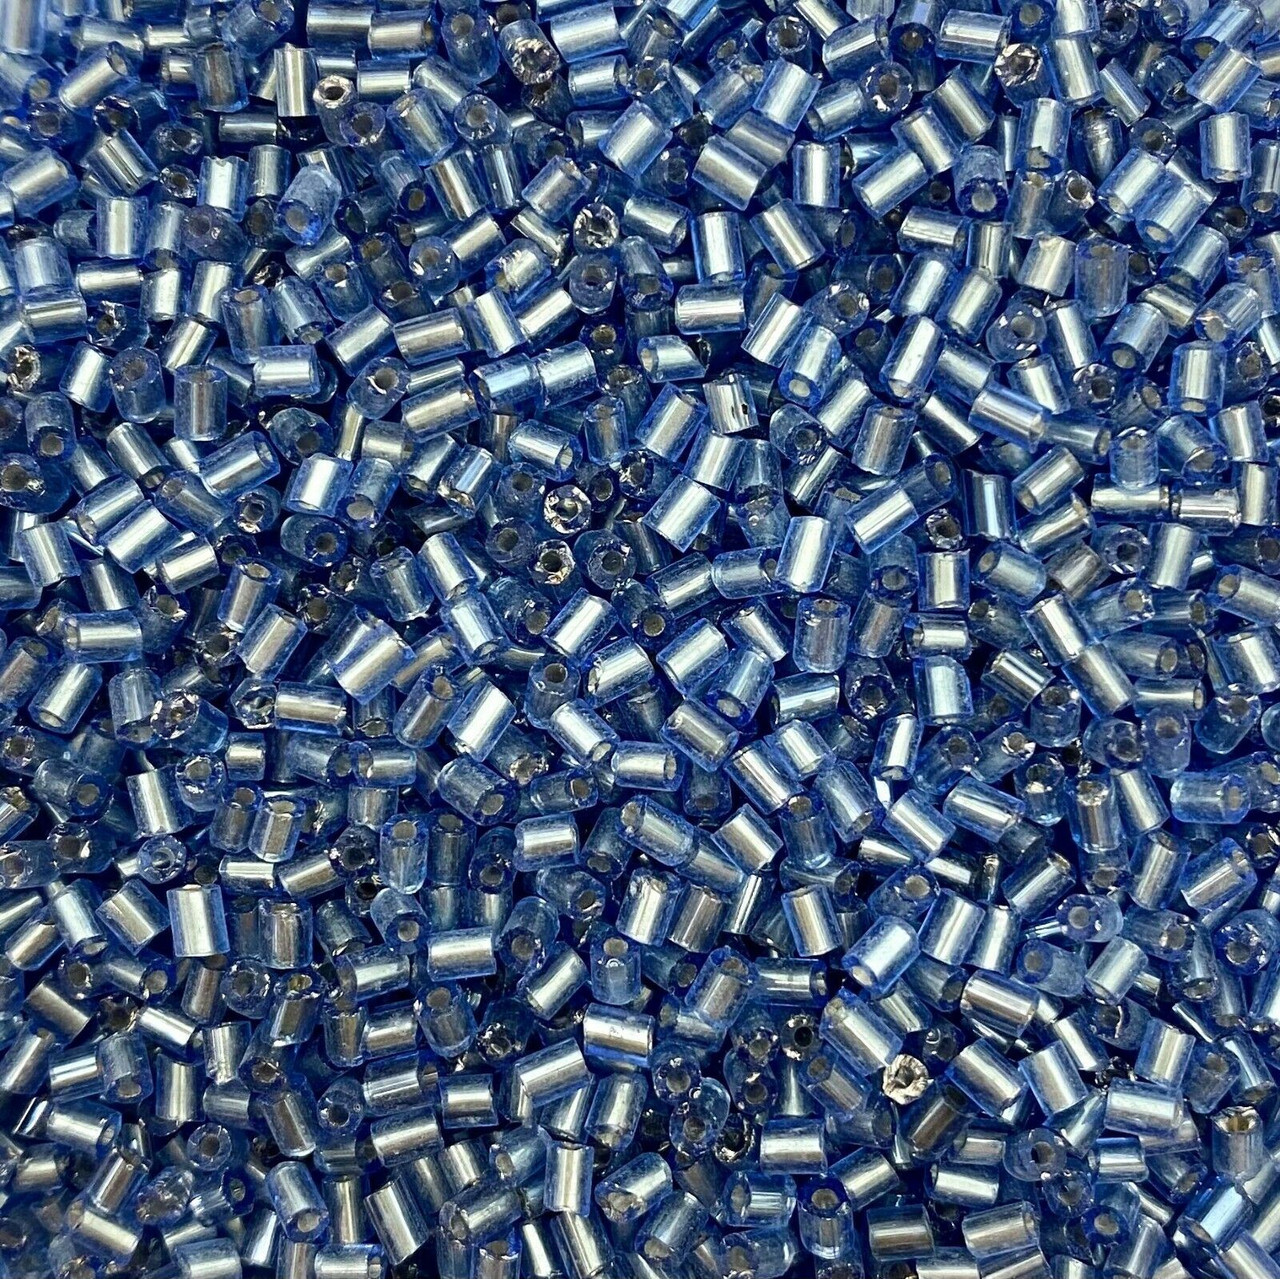 50g glass HEX seed beads - Mid Blue Silver-Lined - size 11/0 (approx 2mm)